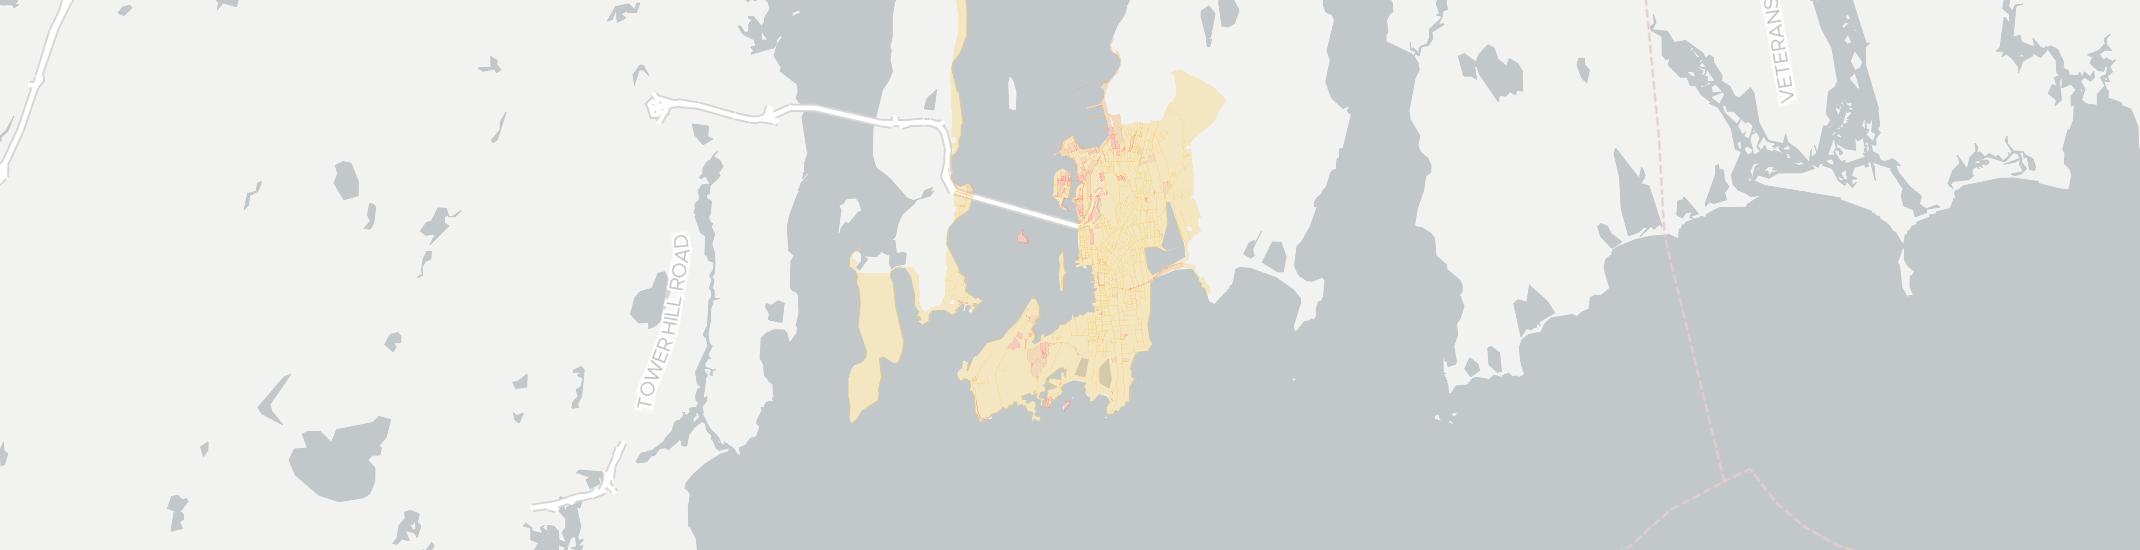 Newport Internet Competition Map. Click for interactive map